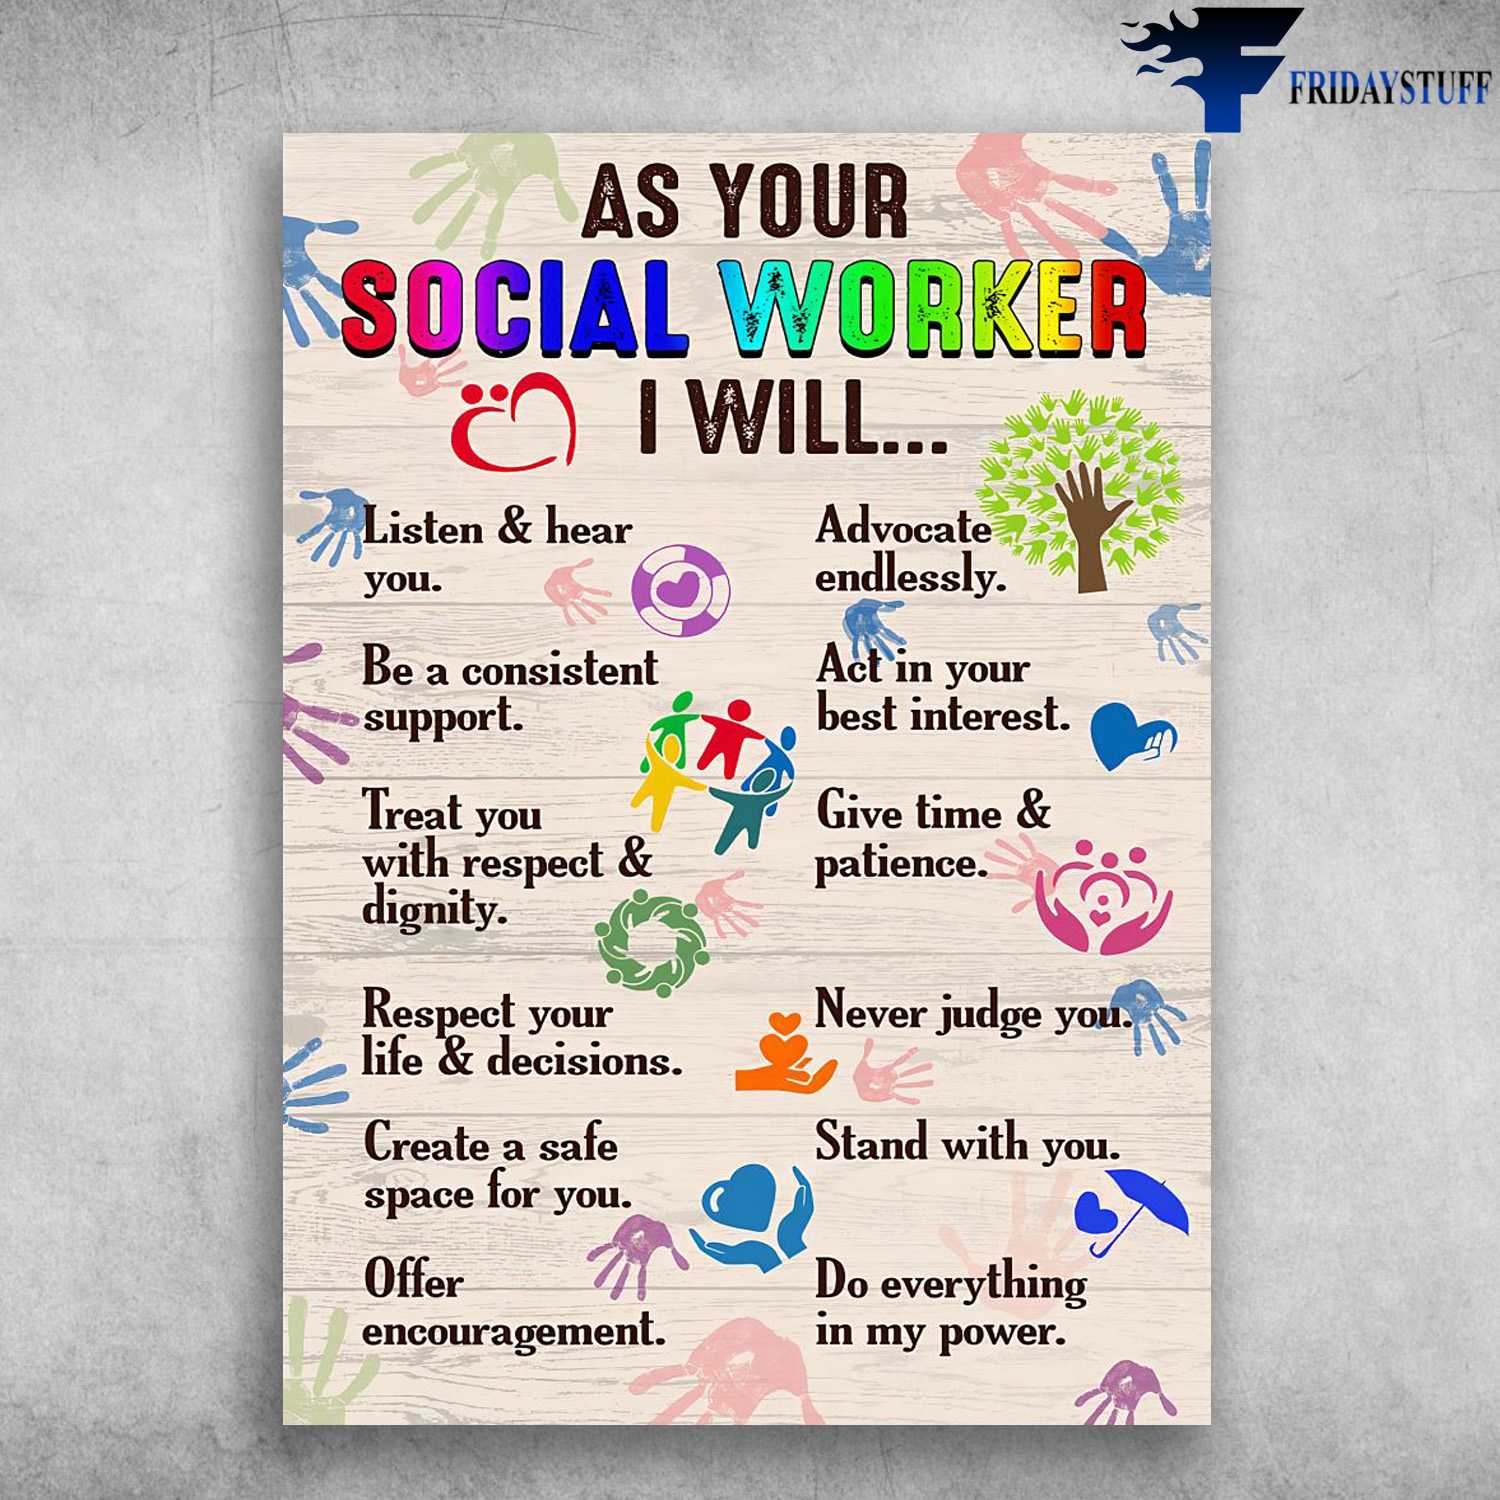 business plans related to social work